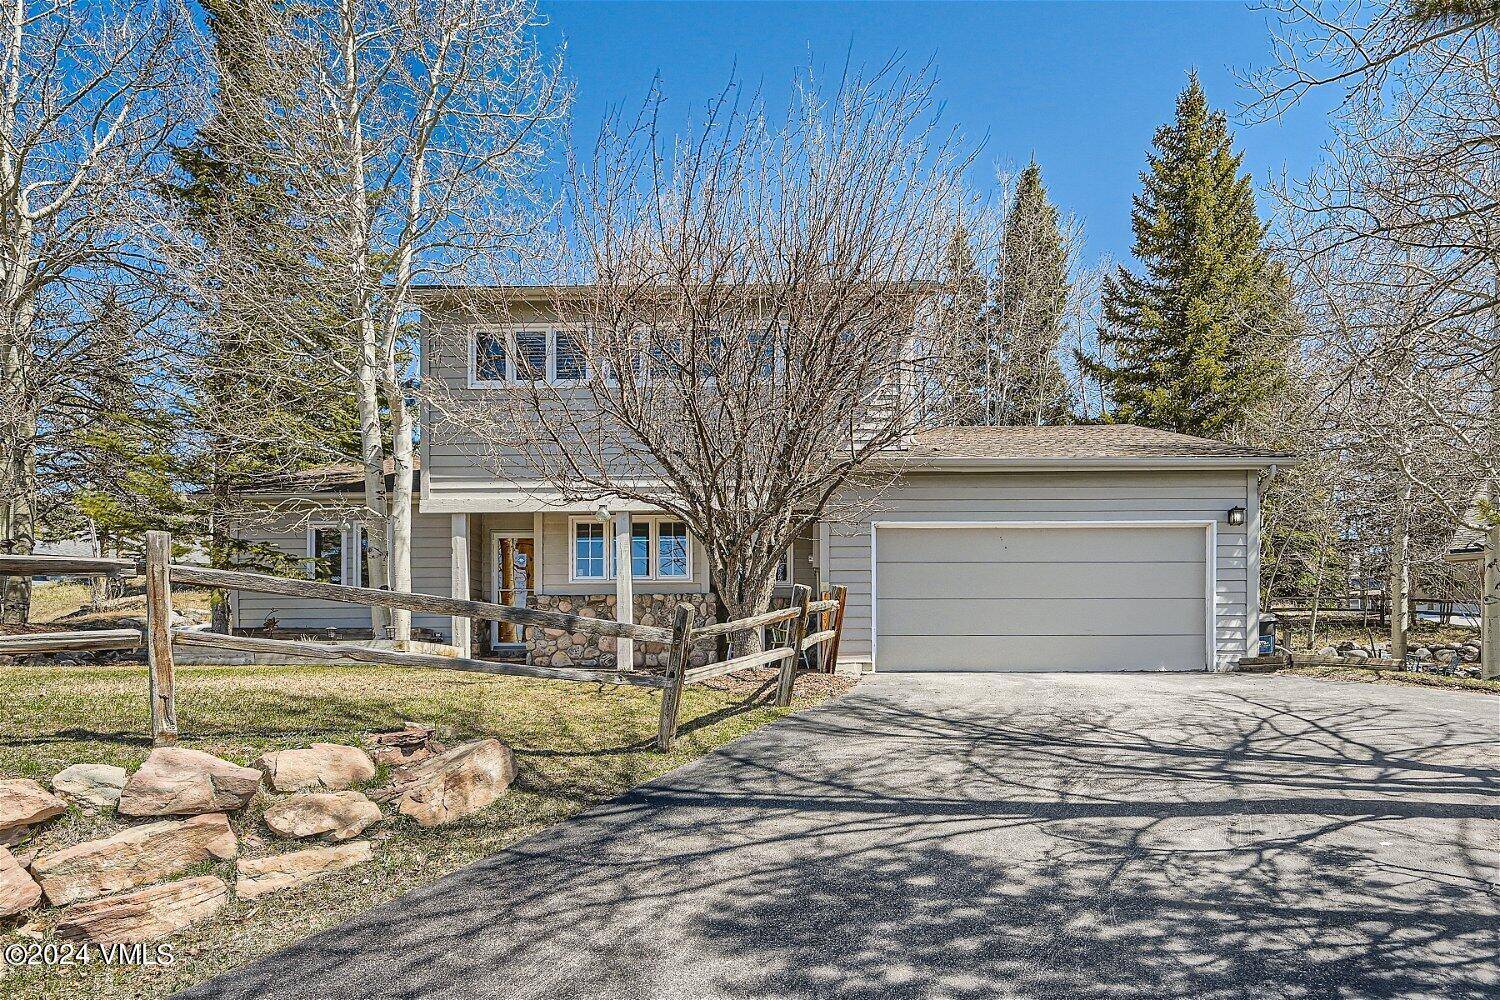 Enjoy Colorado's sunshine all year long in this incredibly rare price point single family home.